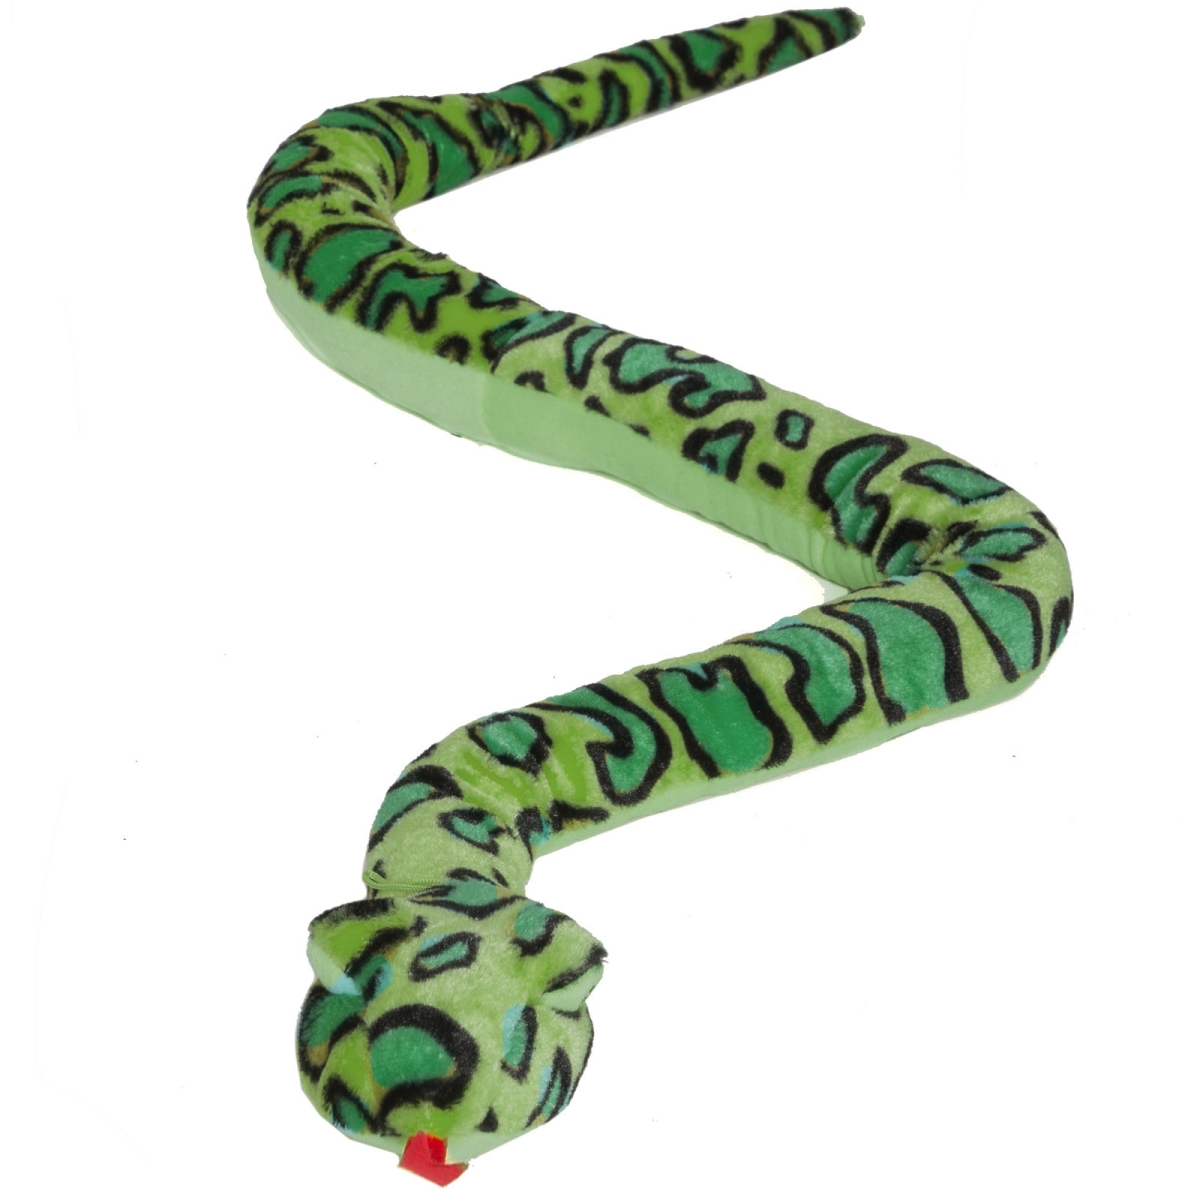 Picture of Giftable World A08062 72 in. Plush Snake - Green